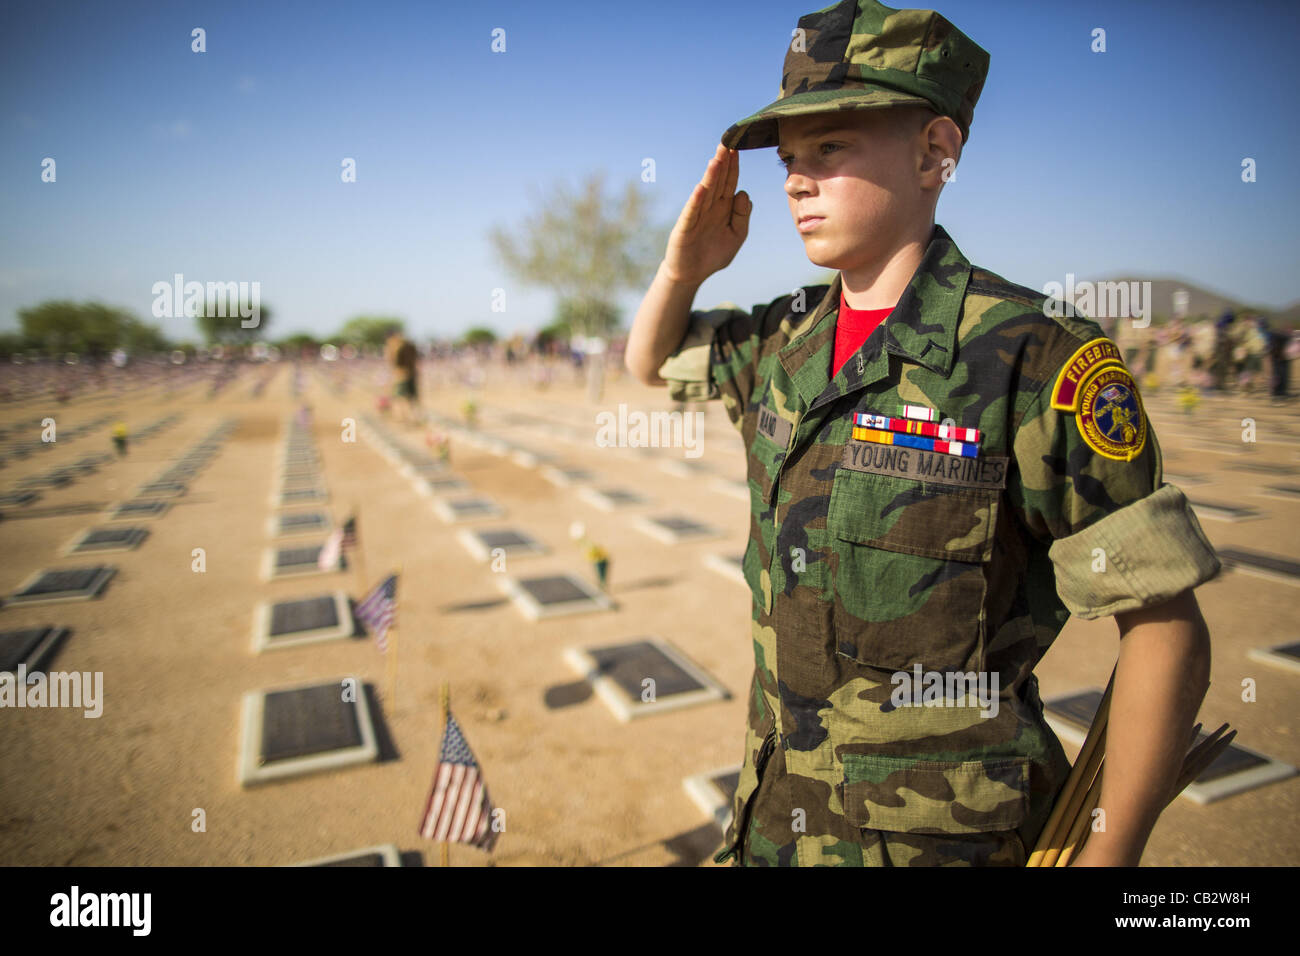 May 26, 2012 KEVYNN BRAND, a member of the Firebirds Young Marines, from Phoenix, AZ, salutes after placing an American flag on a veteran's grave at the National Memorial Cemetery in Phoenix, AZ. Credit Line : Credit:  ZUMA Press, Inc. / Alamy Live News Stock Photo